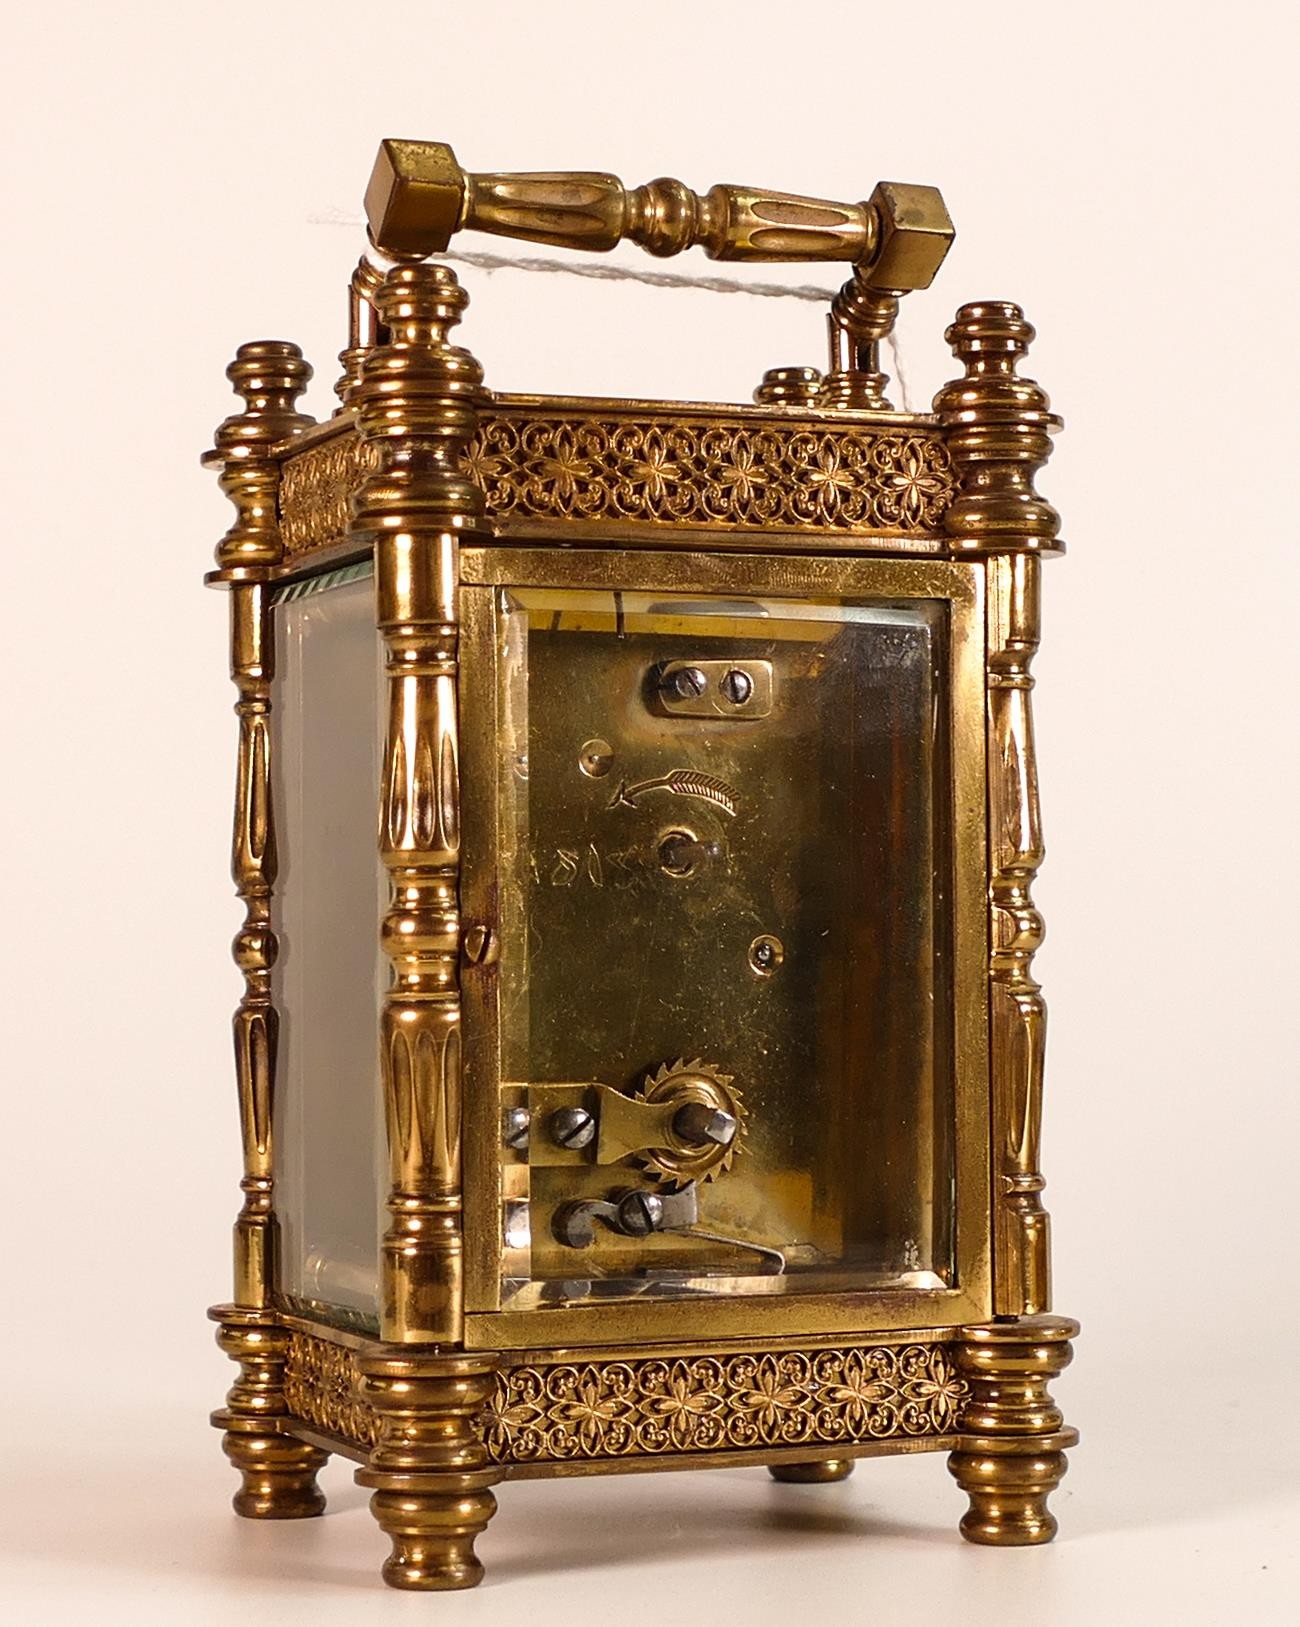 Exceedingly ornate brass carriage clock, late 19th century, no key, sold as not working. 15cm high - Image 3 of 6